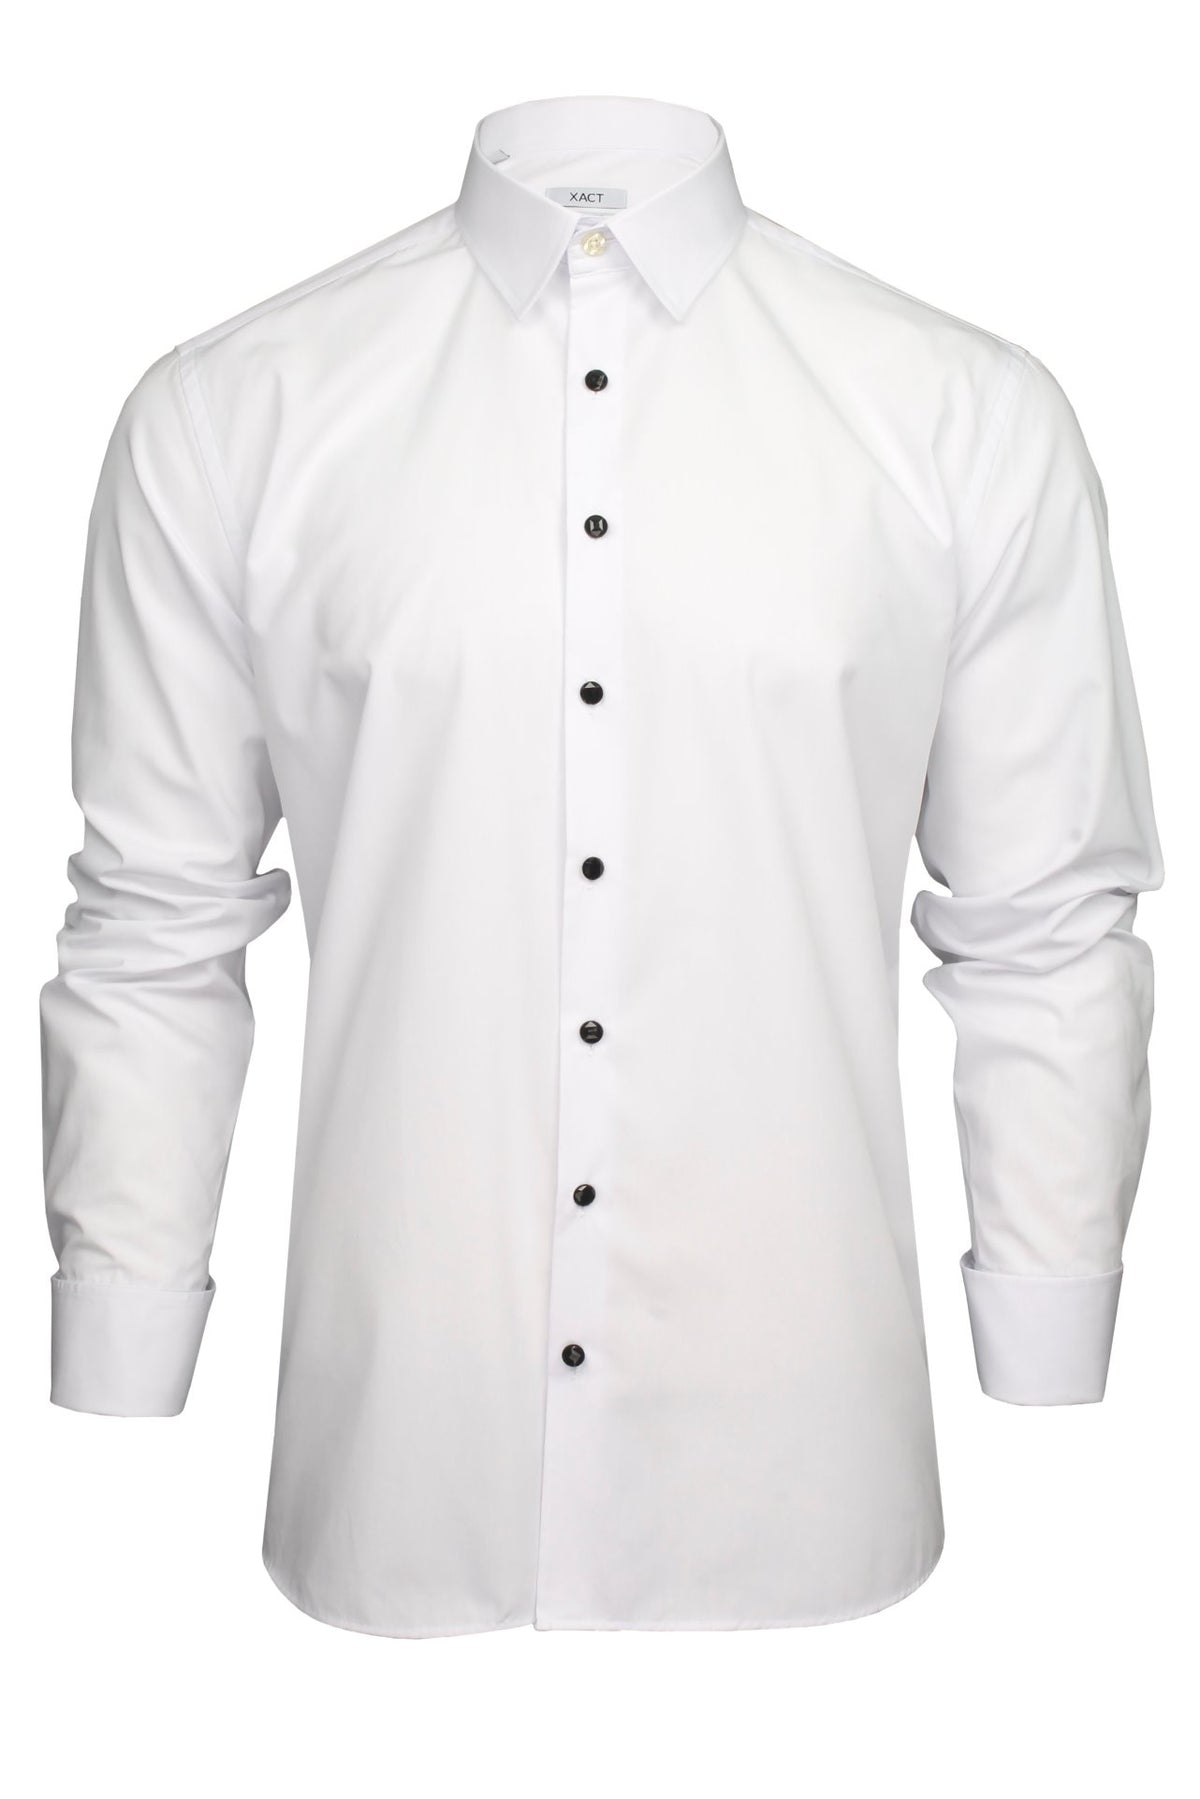 #group_white---standard-collar---black-buttons